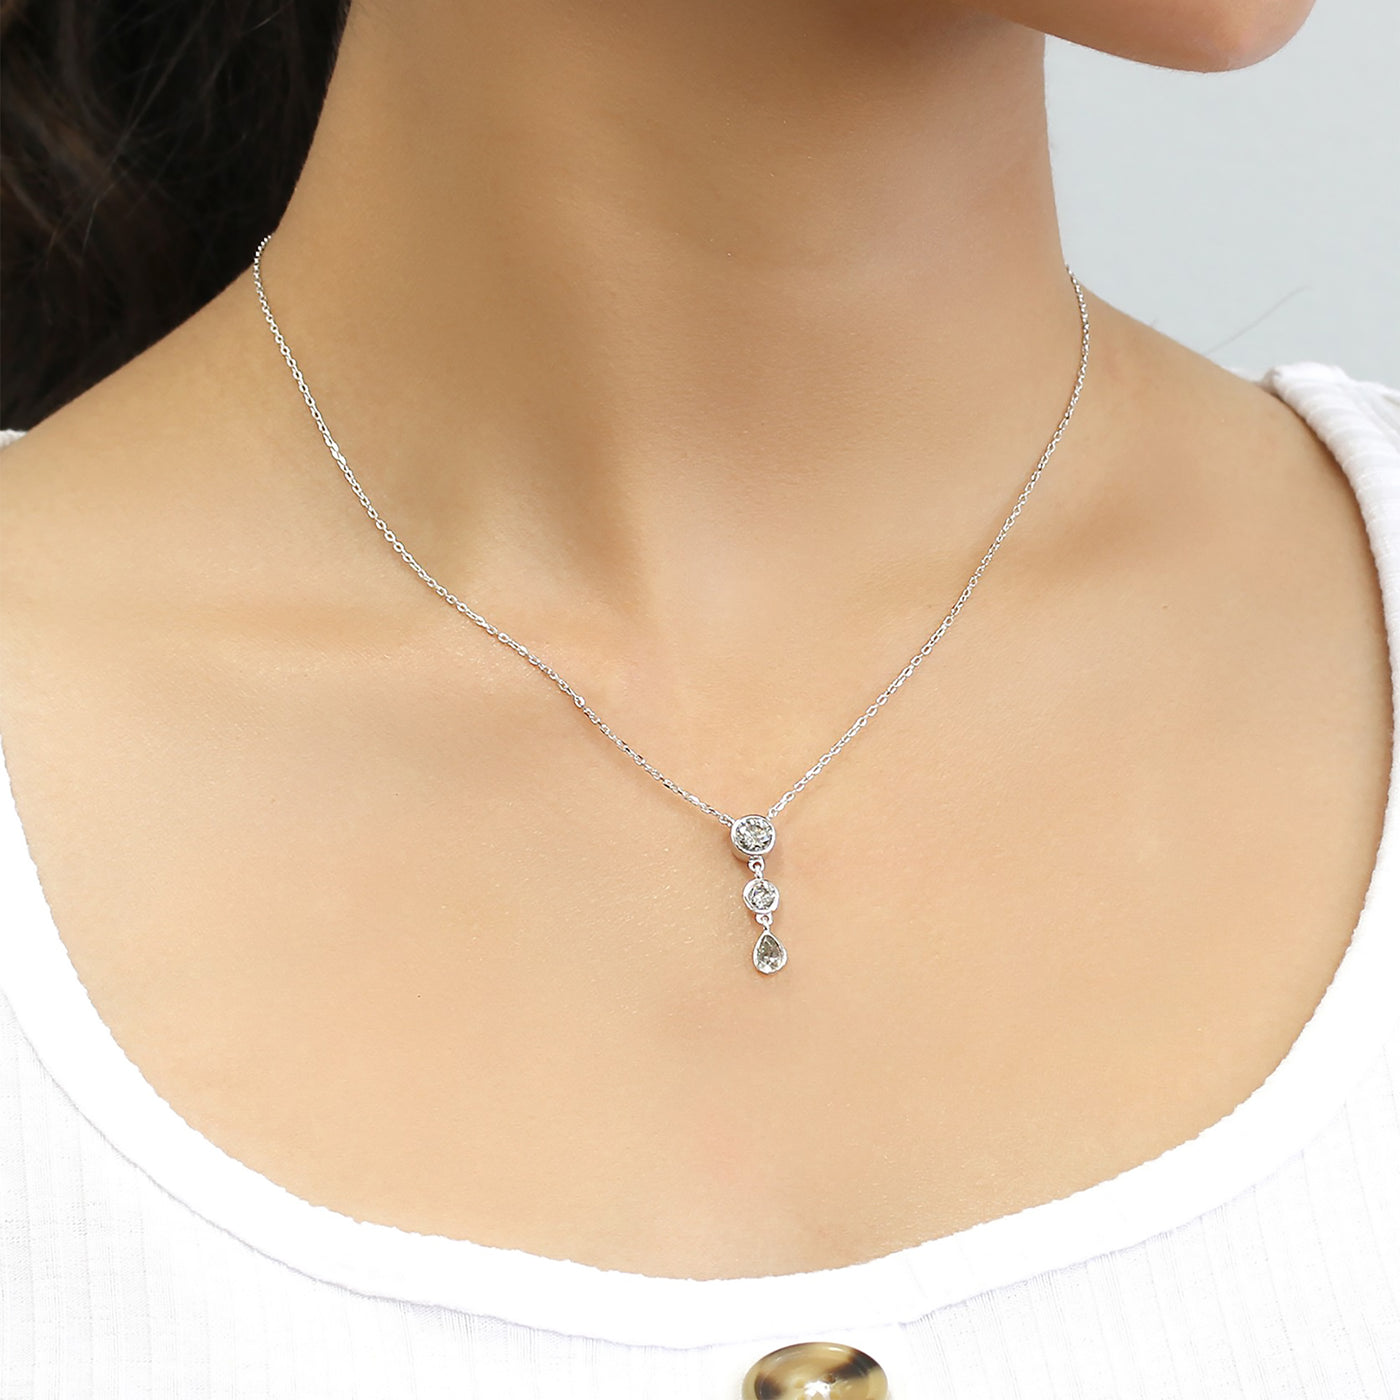 Teardrop Three Stone Pendant Chain Necklace, Gray CZ Platinum Plated Sterling Silver